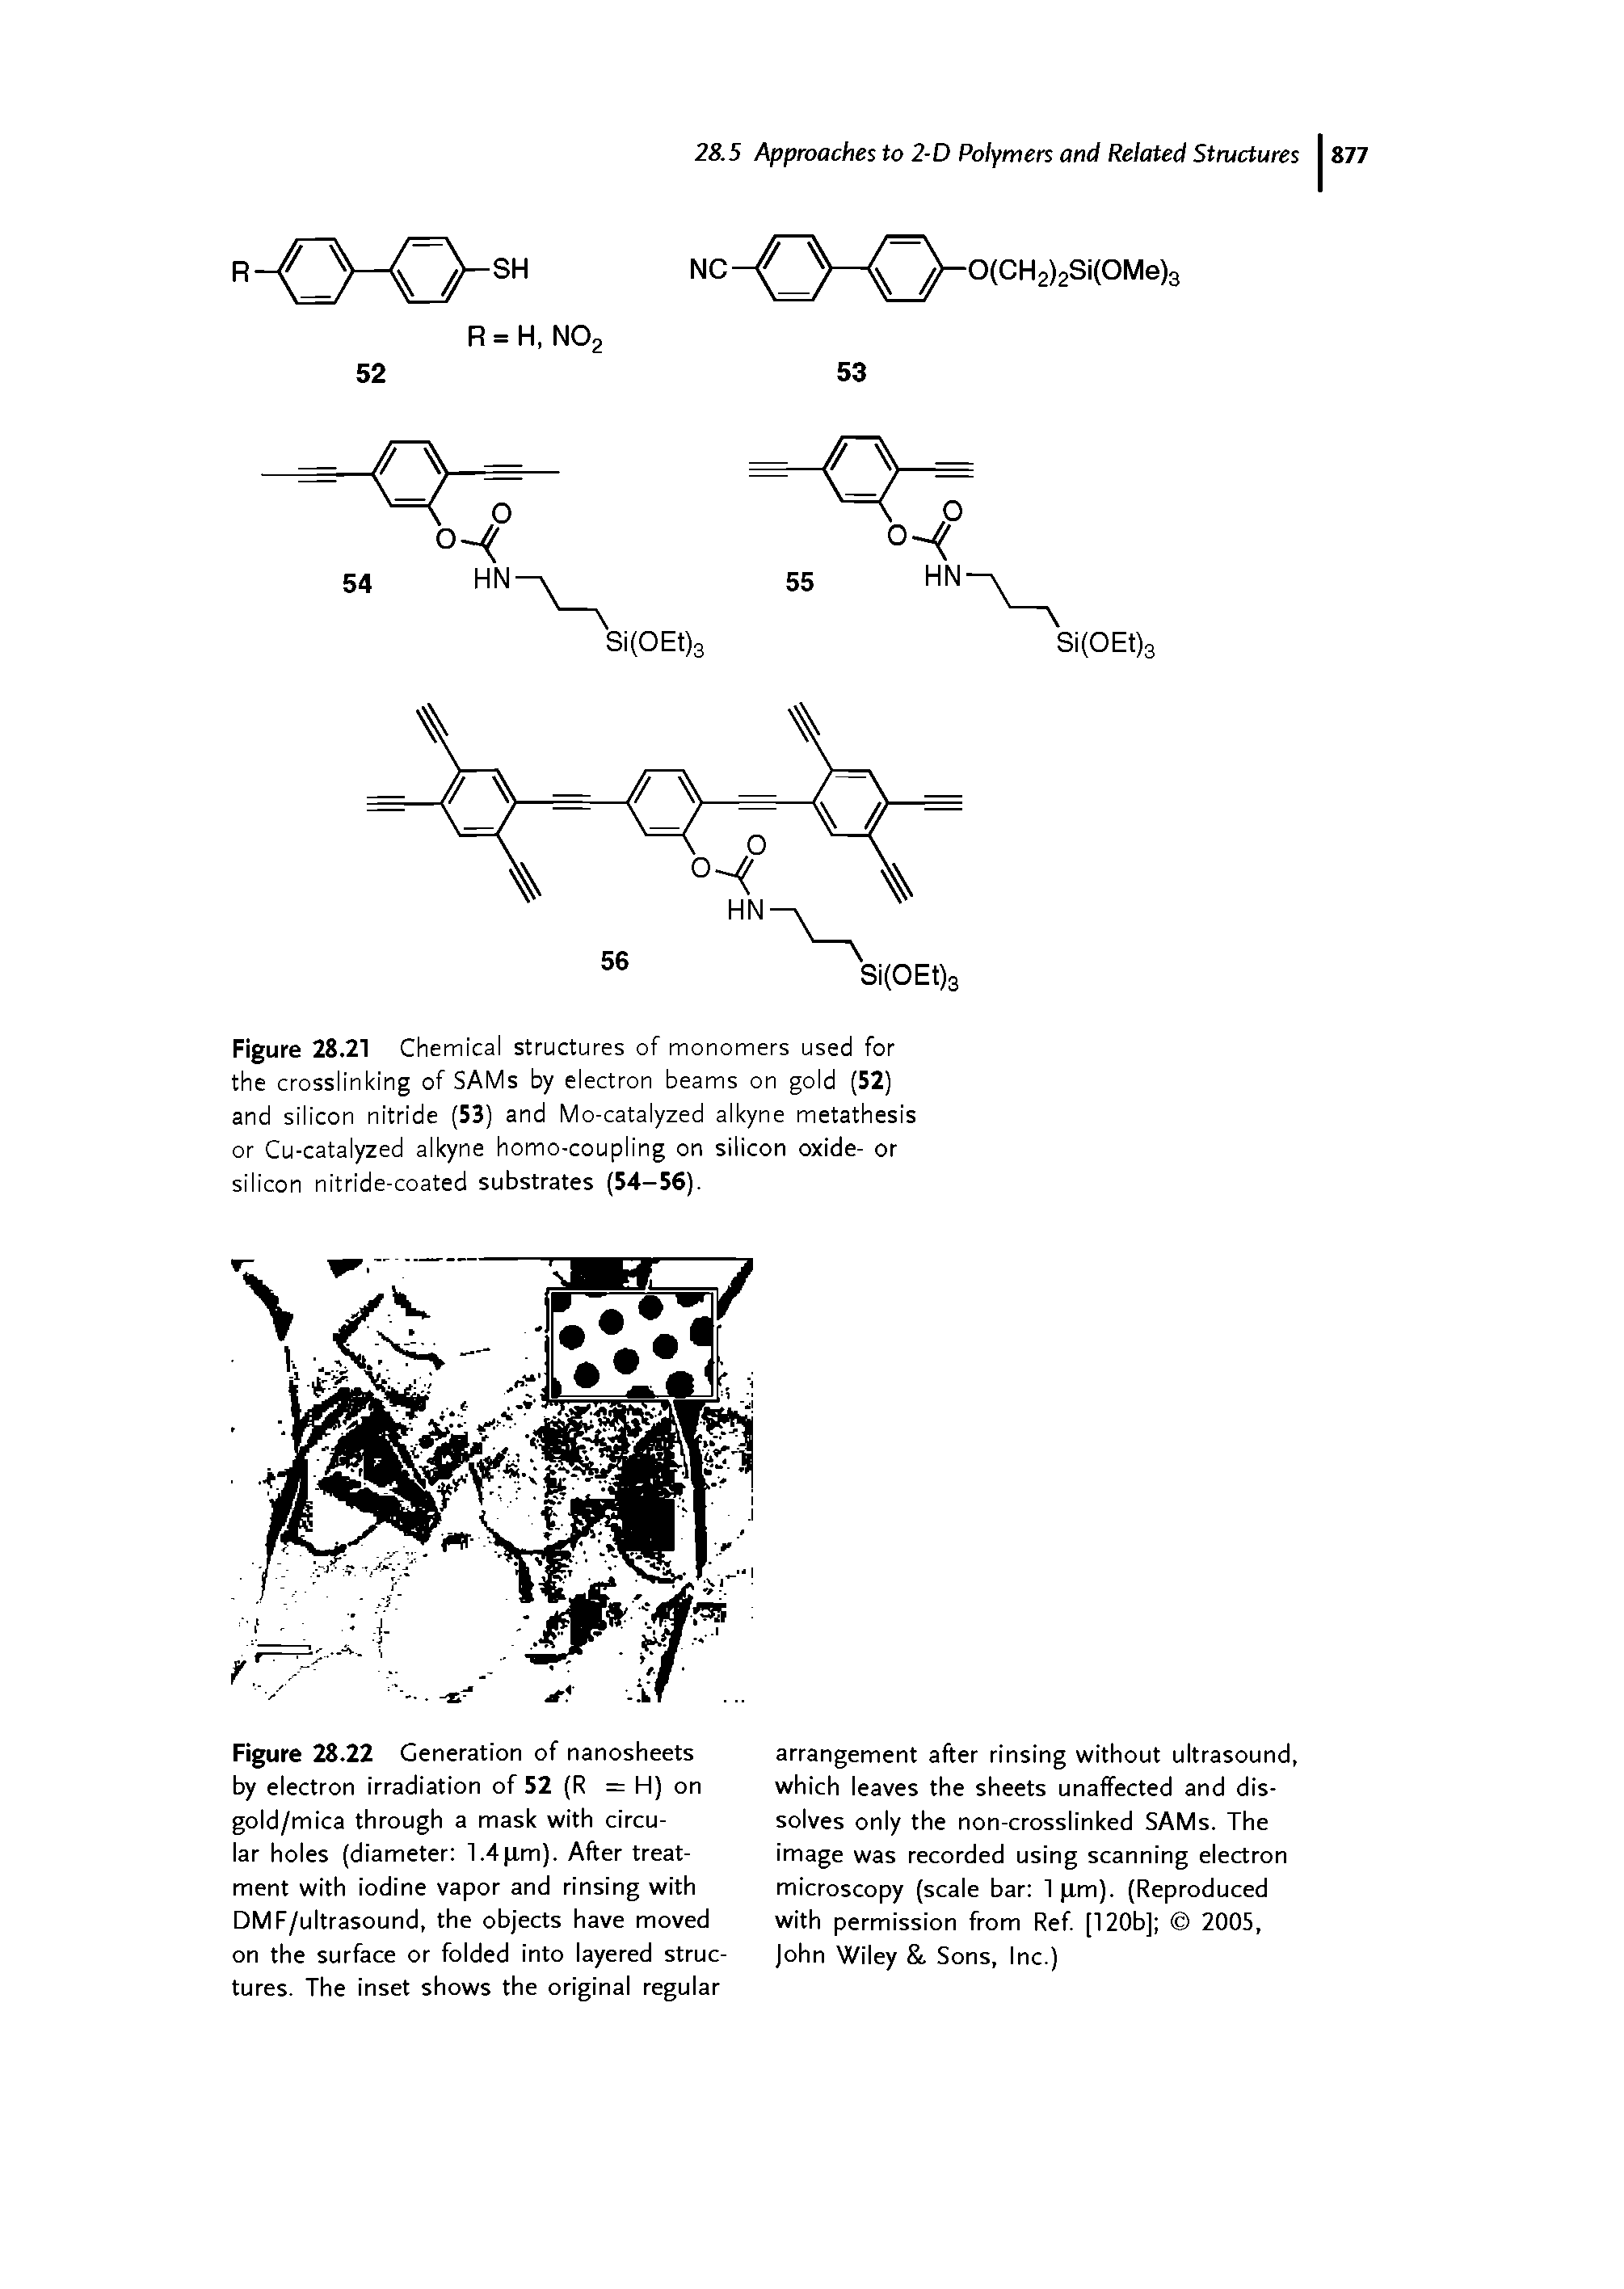 Figure 28.21 Chemical structures of monomers used for the crosslinking of SAMs by electron beams on gold (52) and silicon nitride (53) and Mo-catalyzed alkyne metathesis or Cu-catalyzed alkyne homo-coupling on silicon oxide- or silicon nitride-coated substrates (54-56).